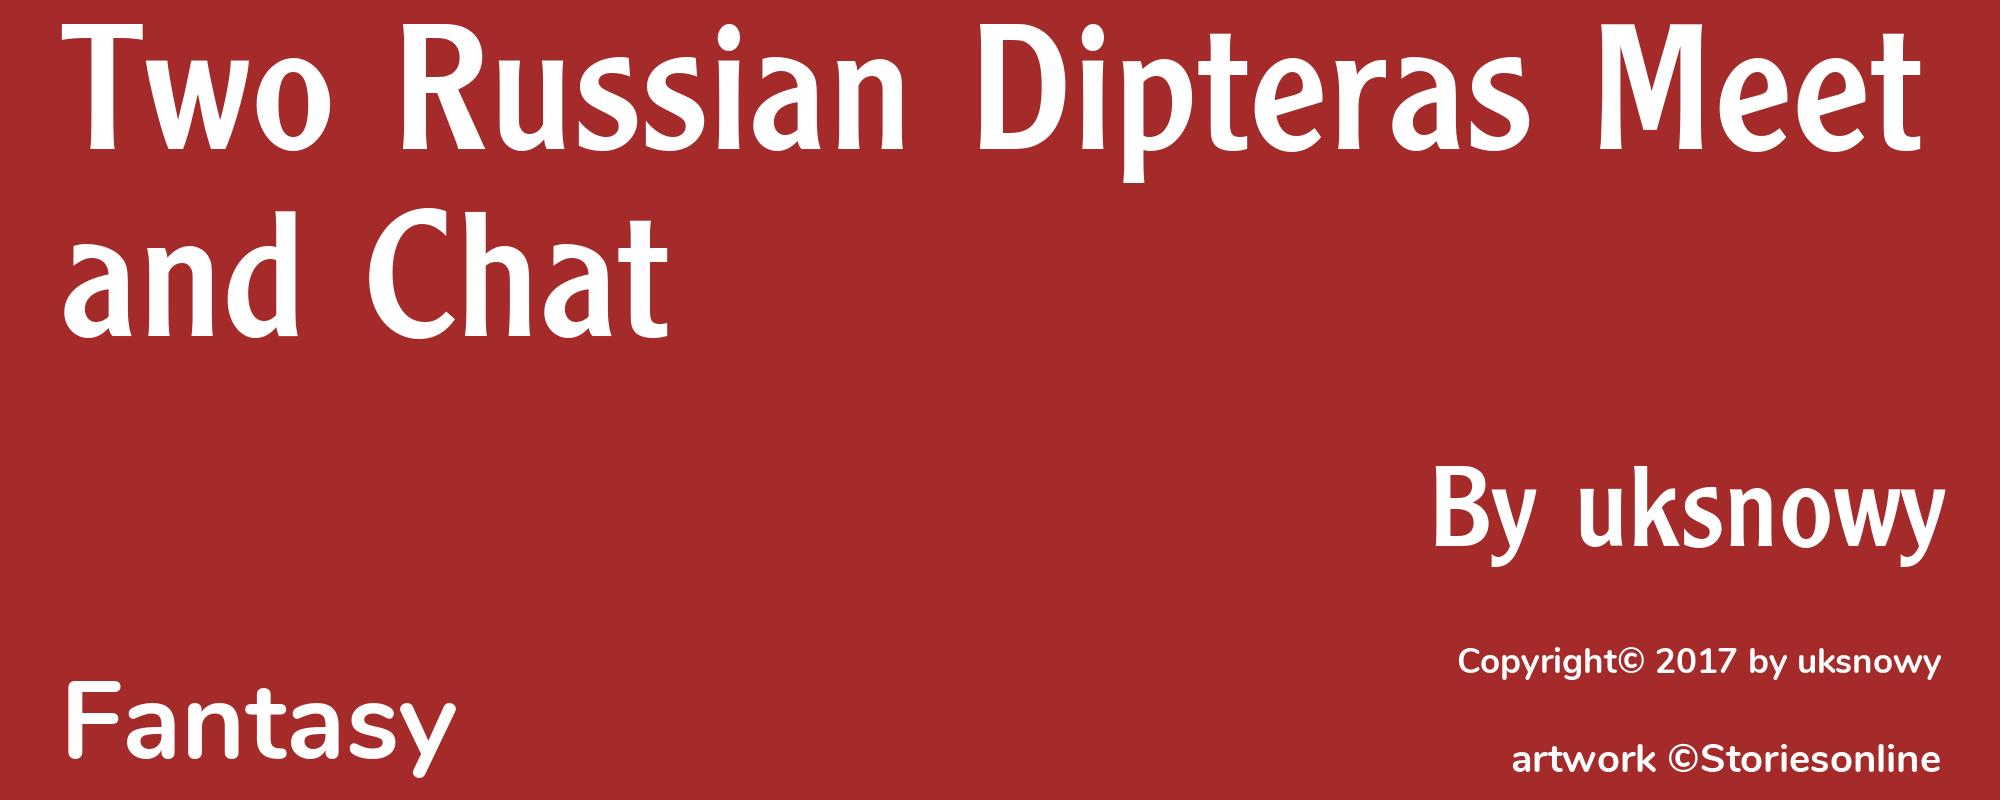 Two Russian Dipteras Meet and Chat - Cover